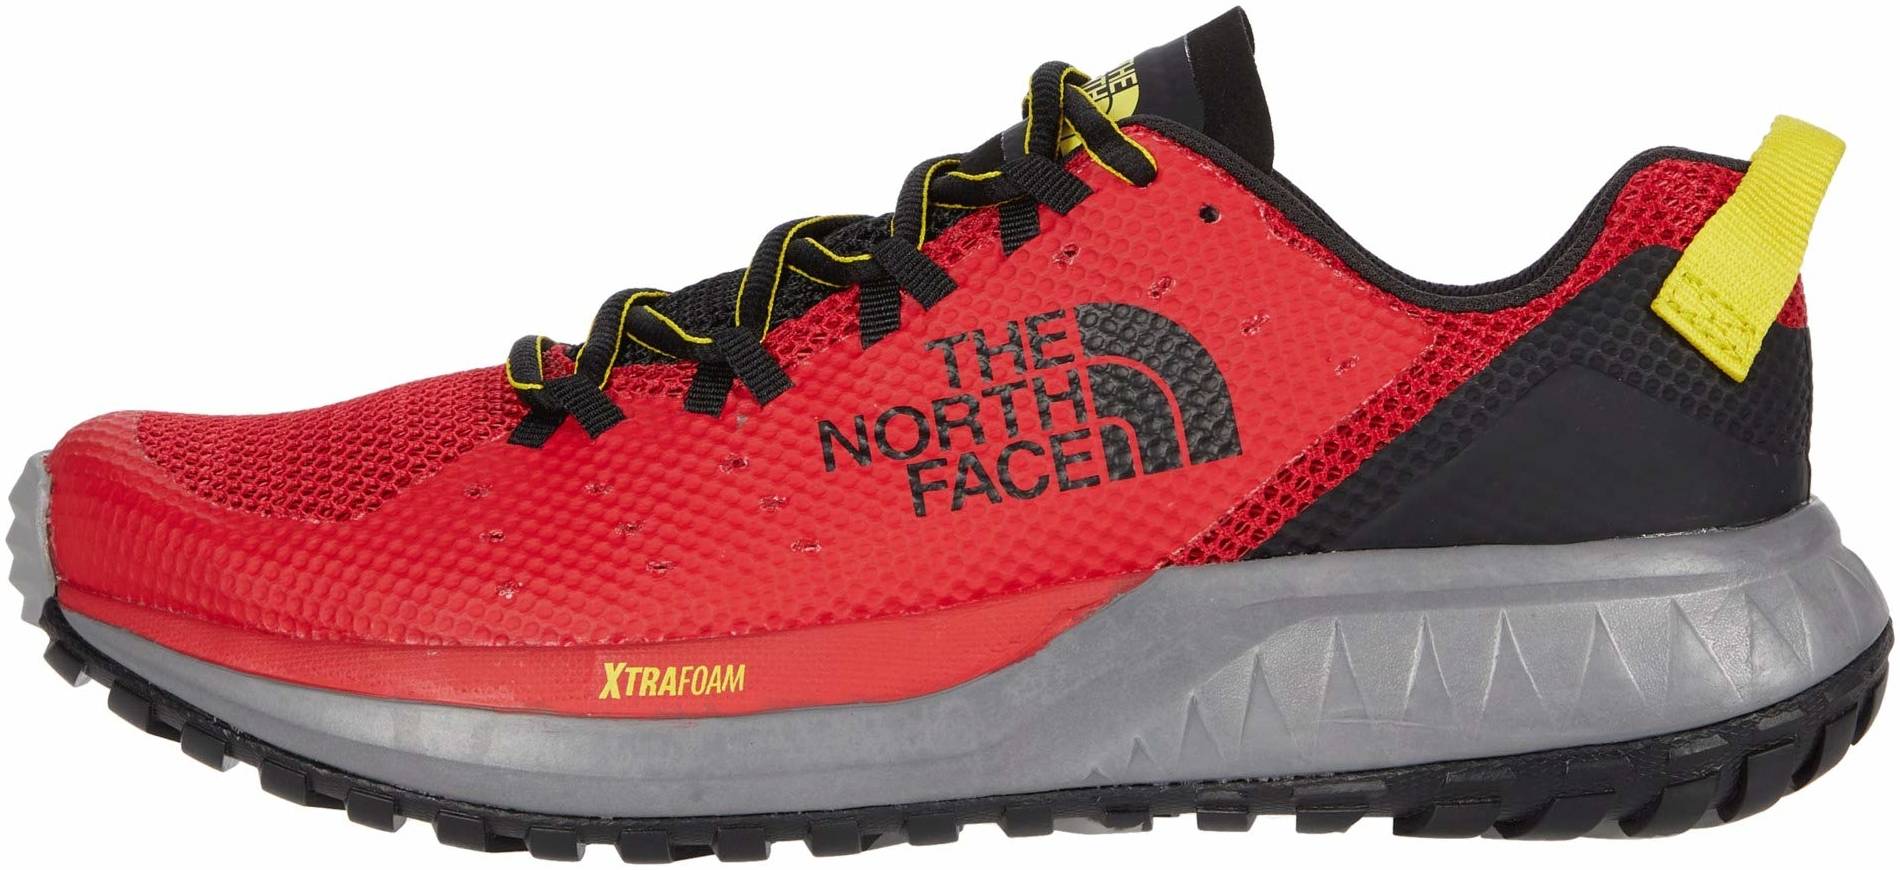 the north face footwear